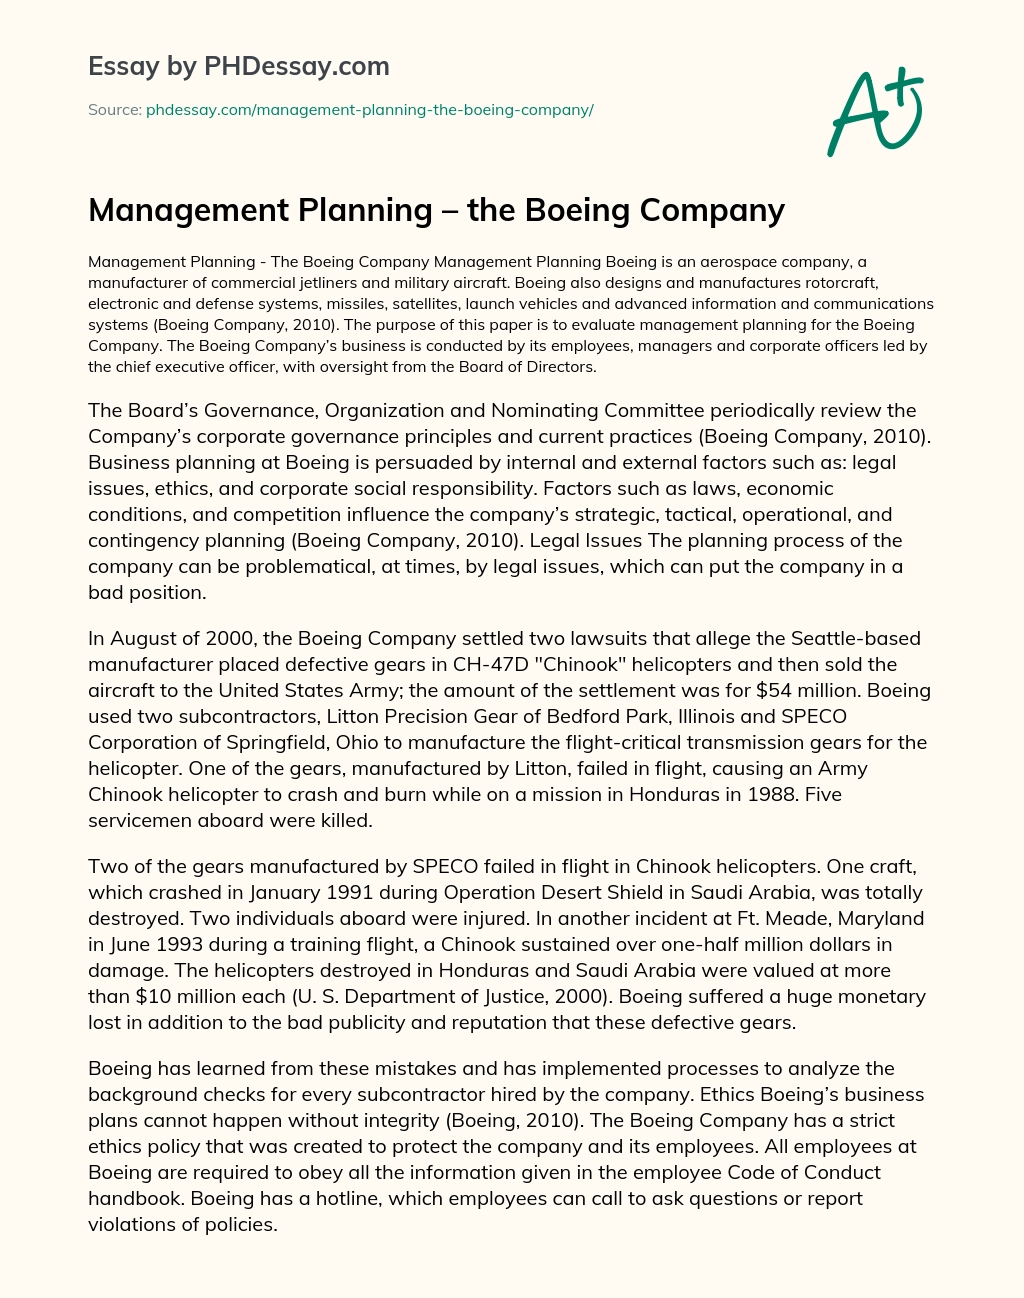 Management Planning – the Boeing Company essay